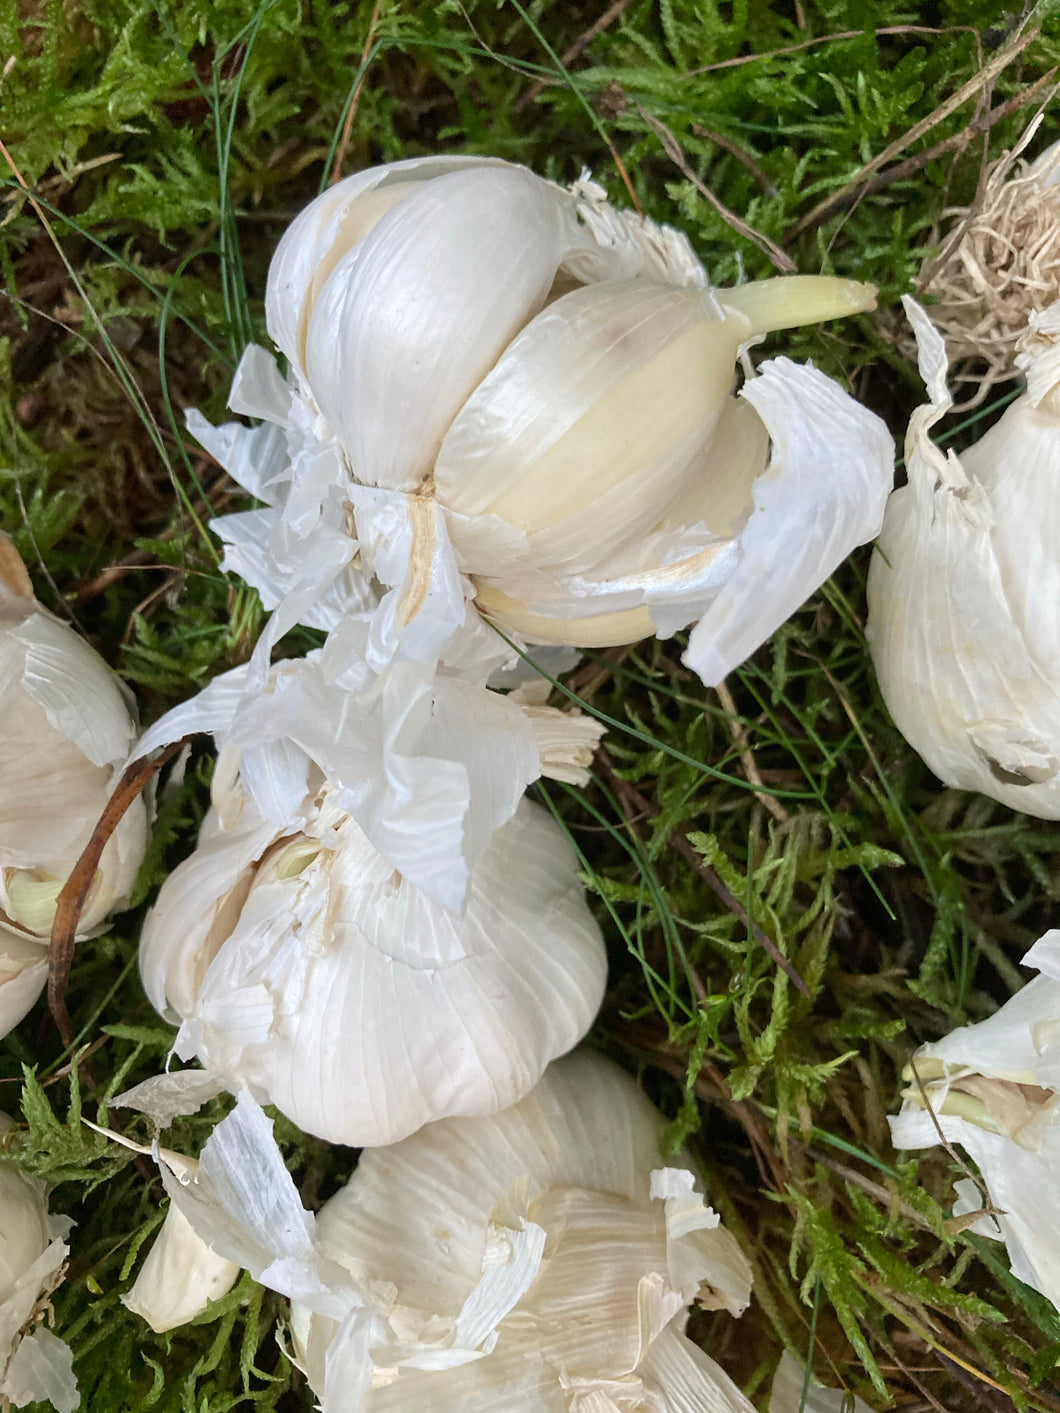 5 bulbs of Garlic for Grow-Your-Own Includes Postage